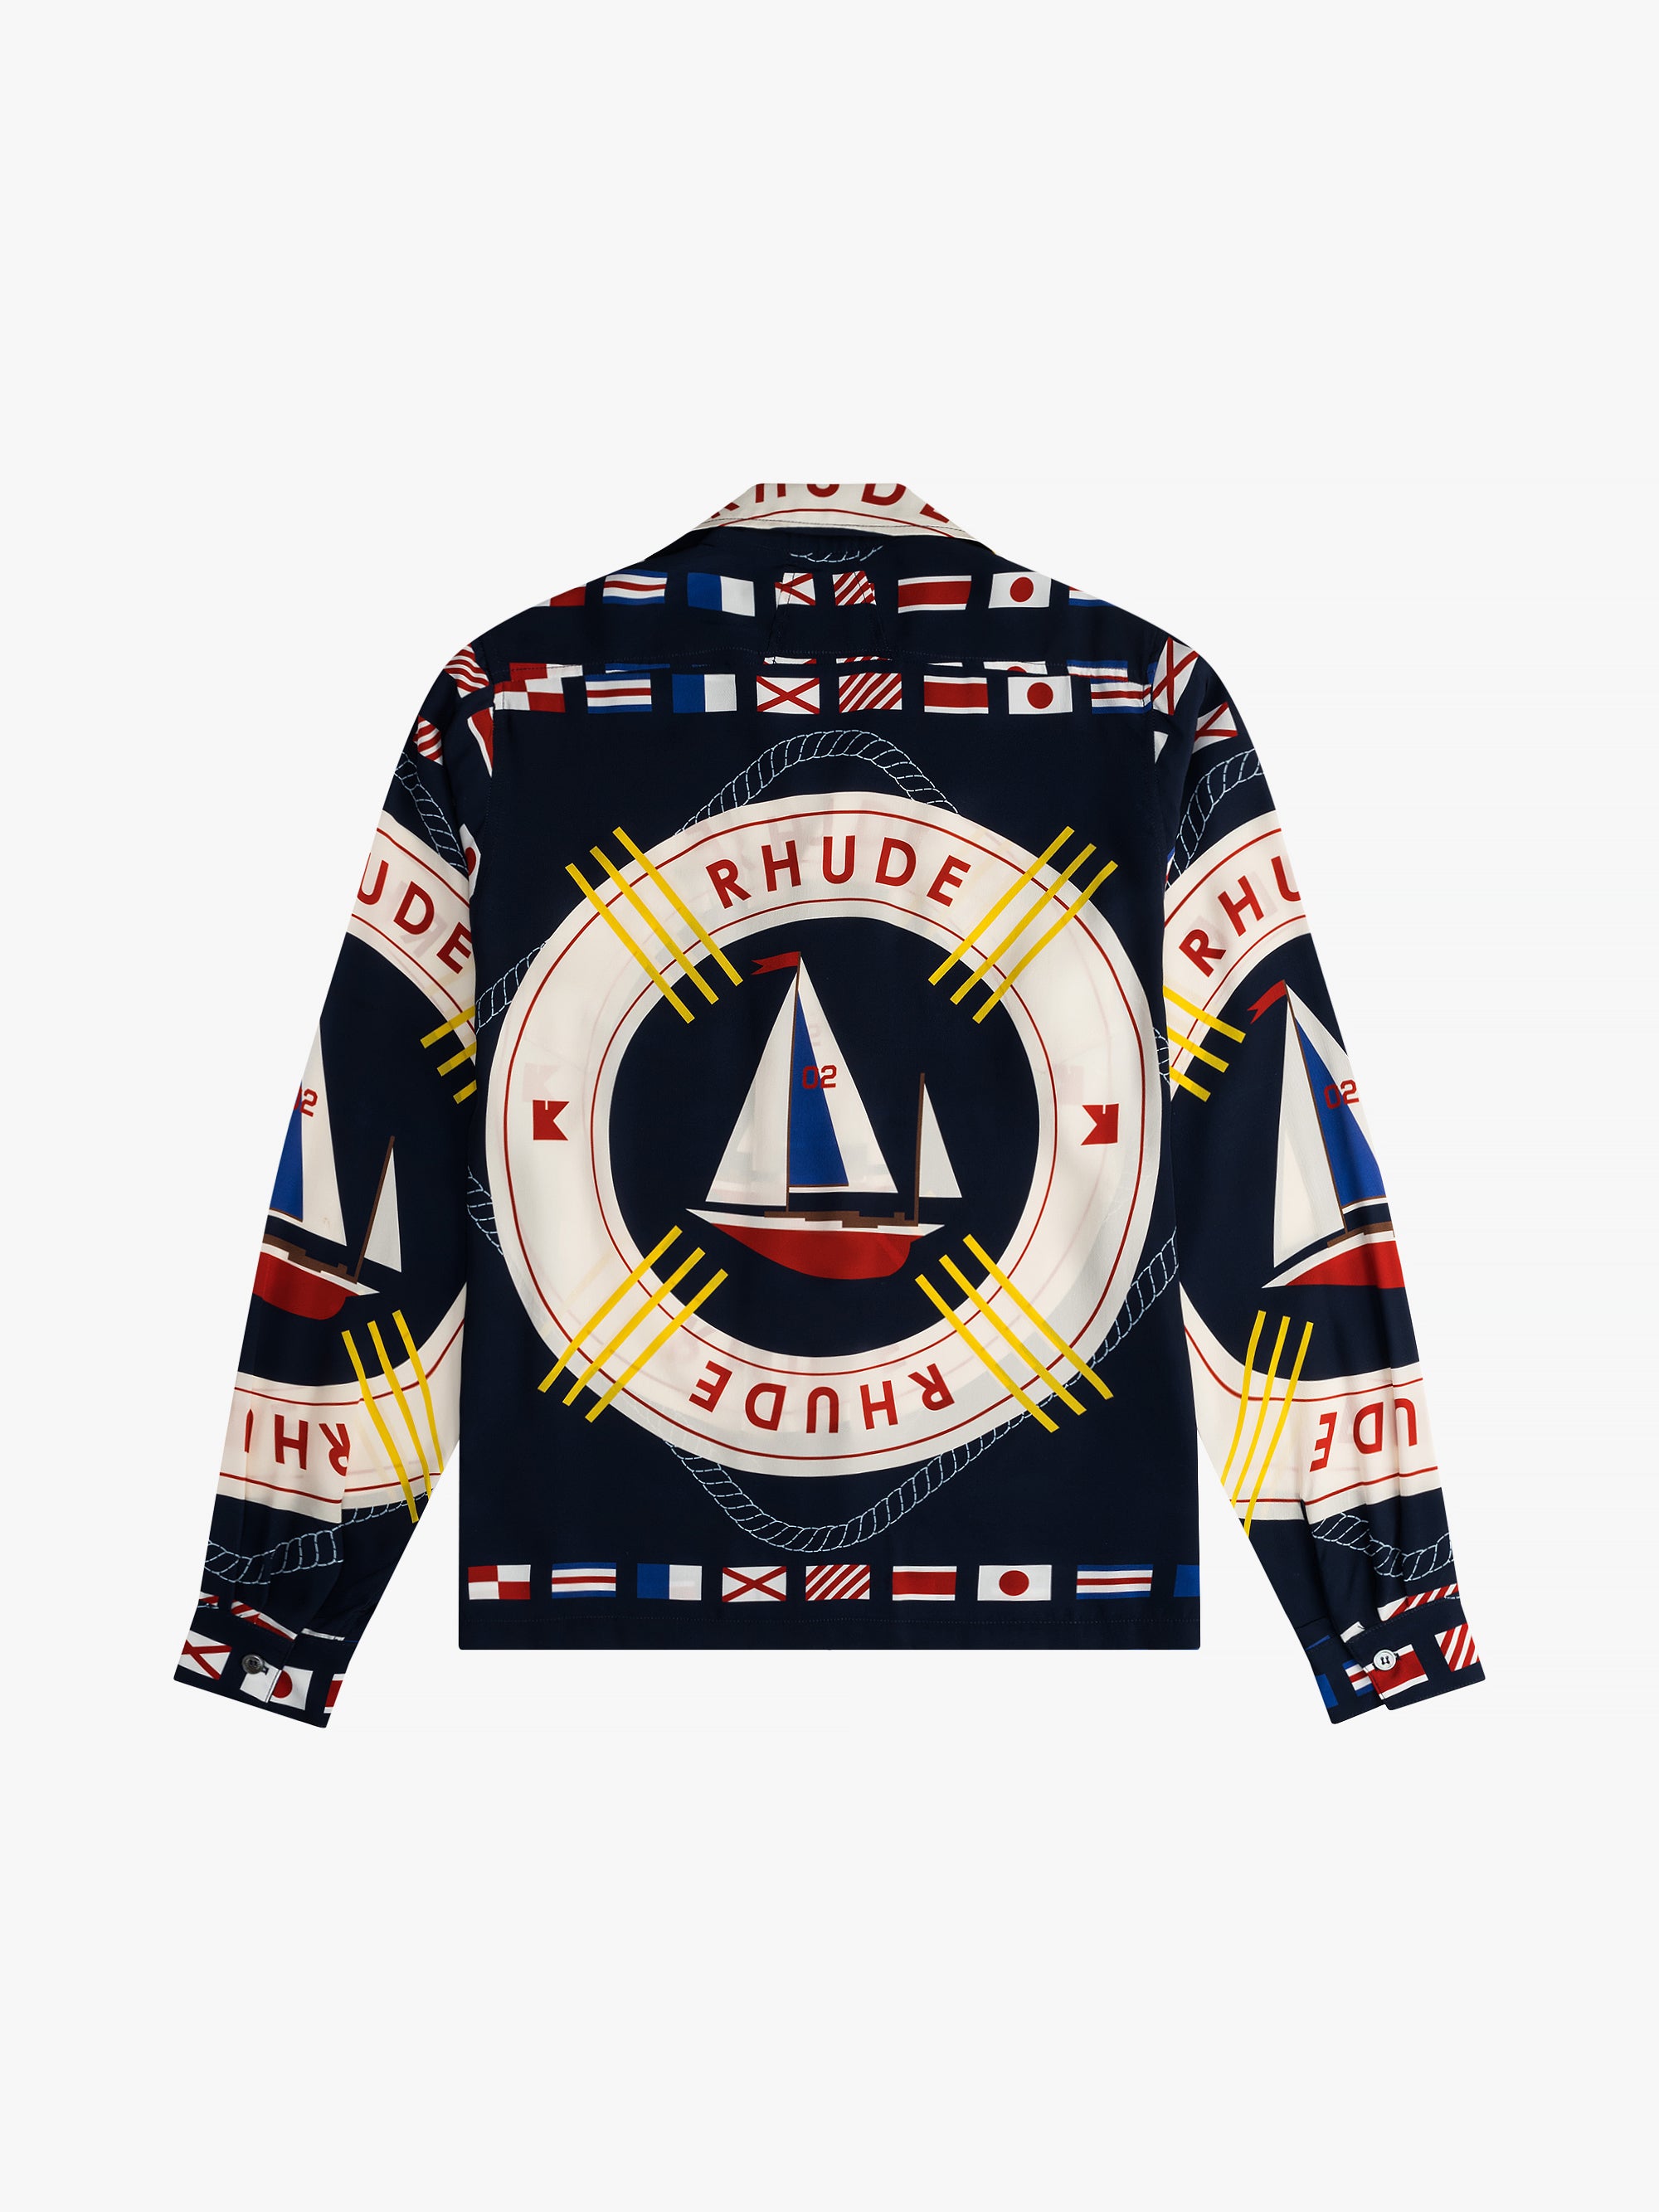 New RHUDE hoodie available now in store and online Probus.nyc and through  the app 👁️👁️ ⬅️ (( Swipe )) . . #probusnyc #stre